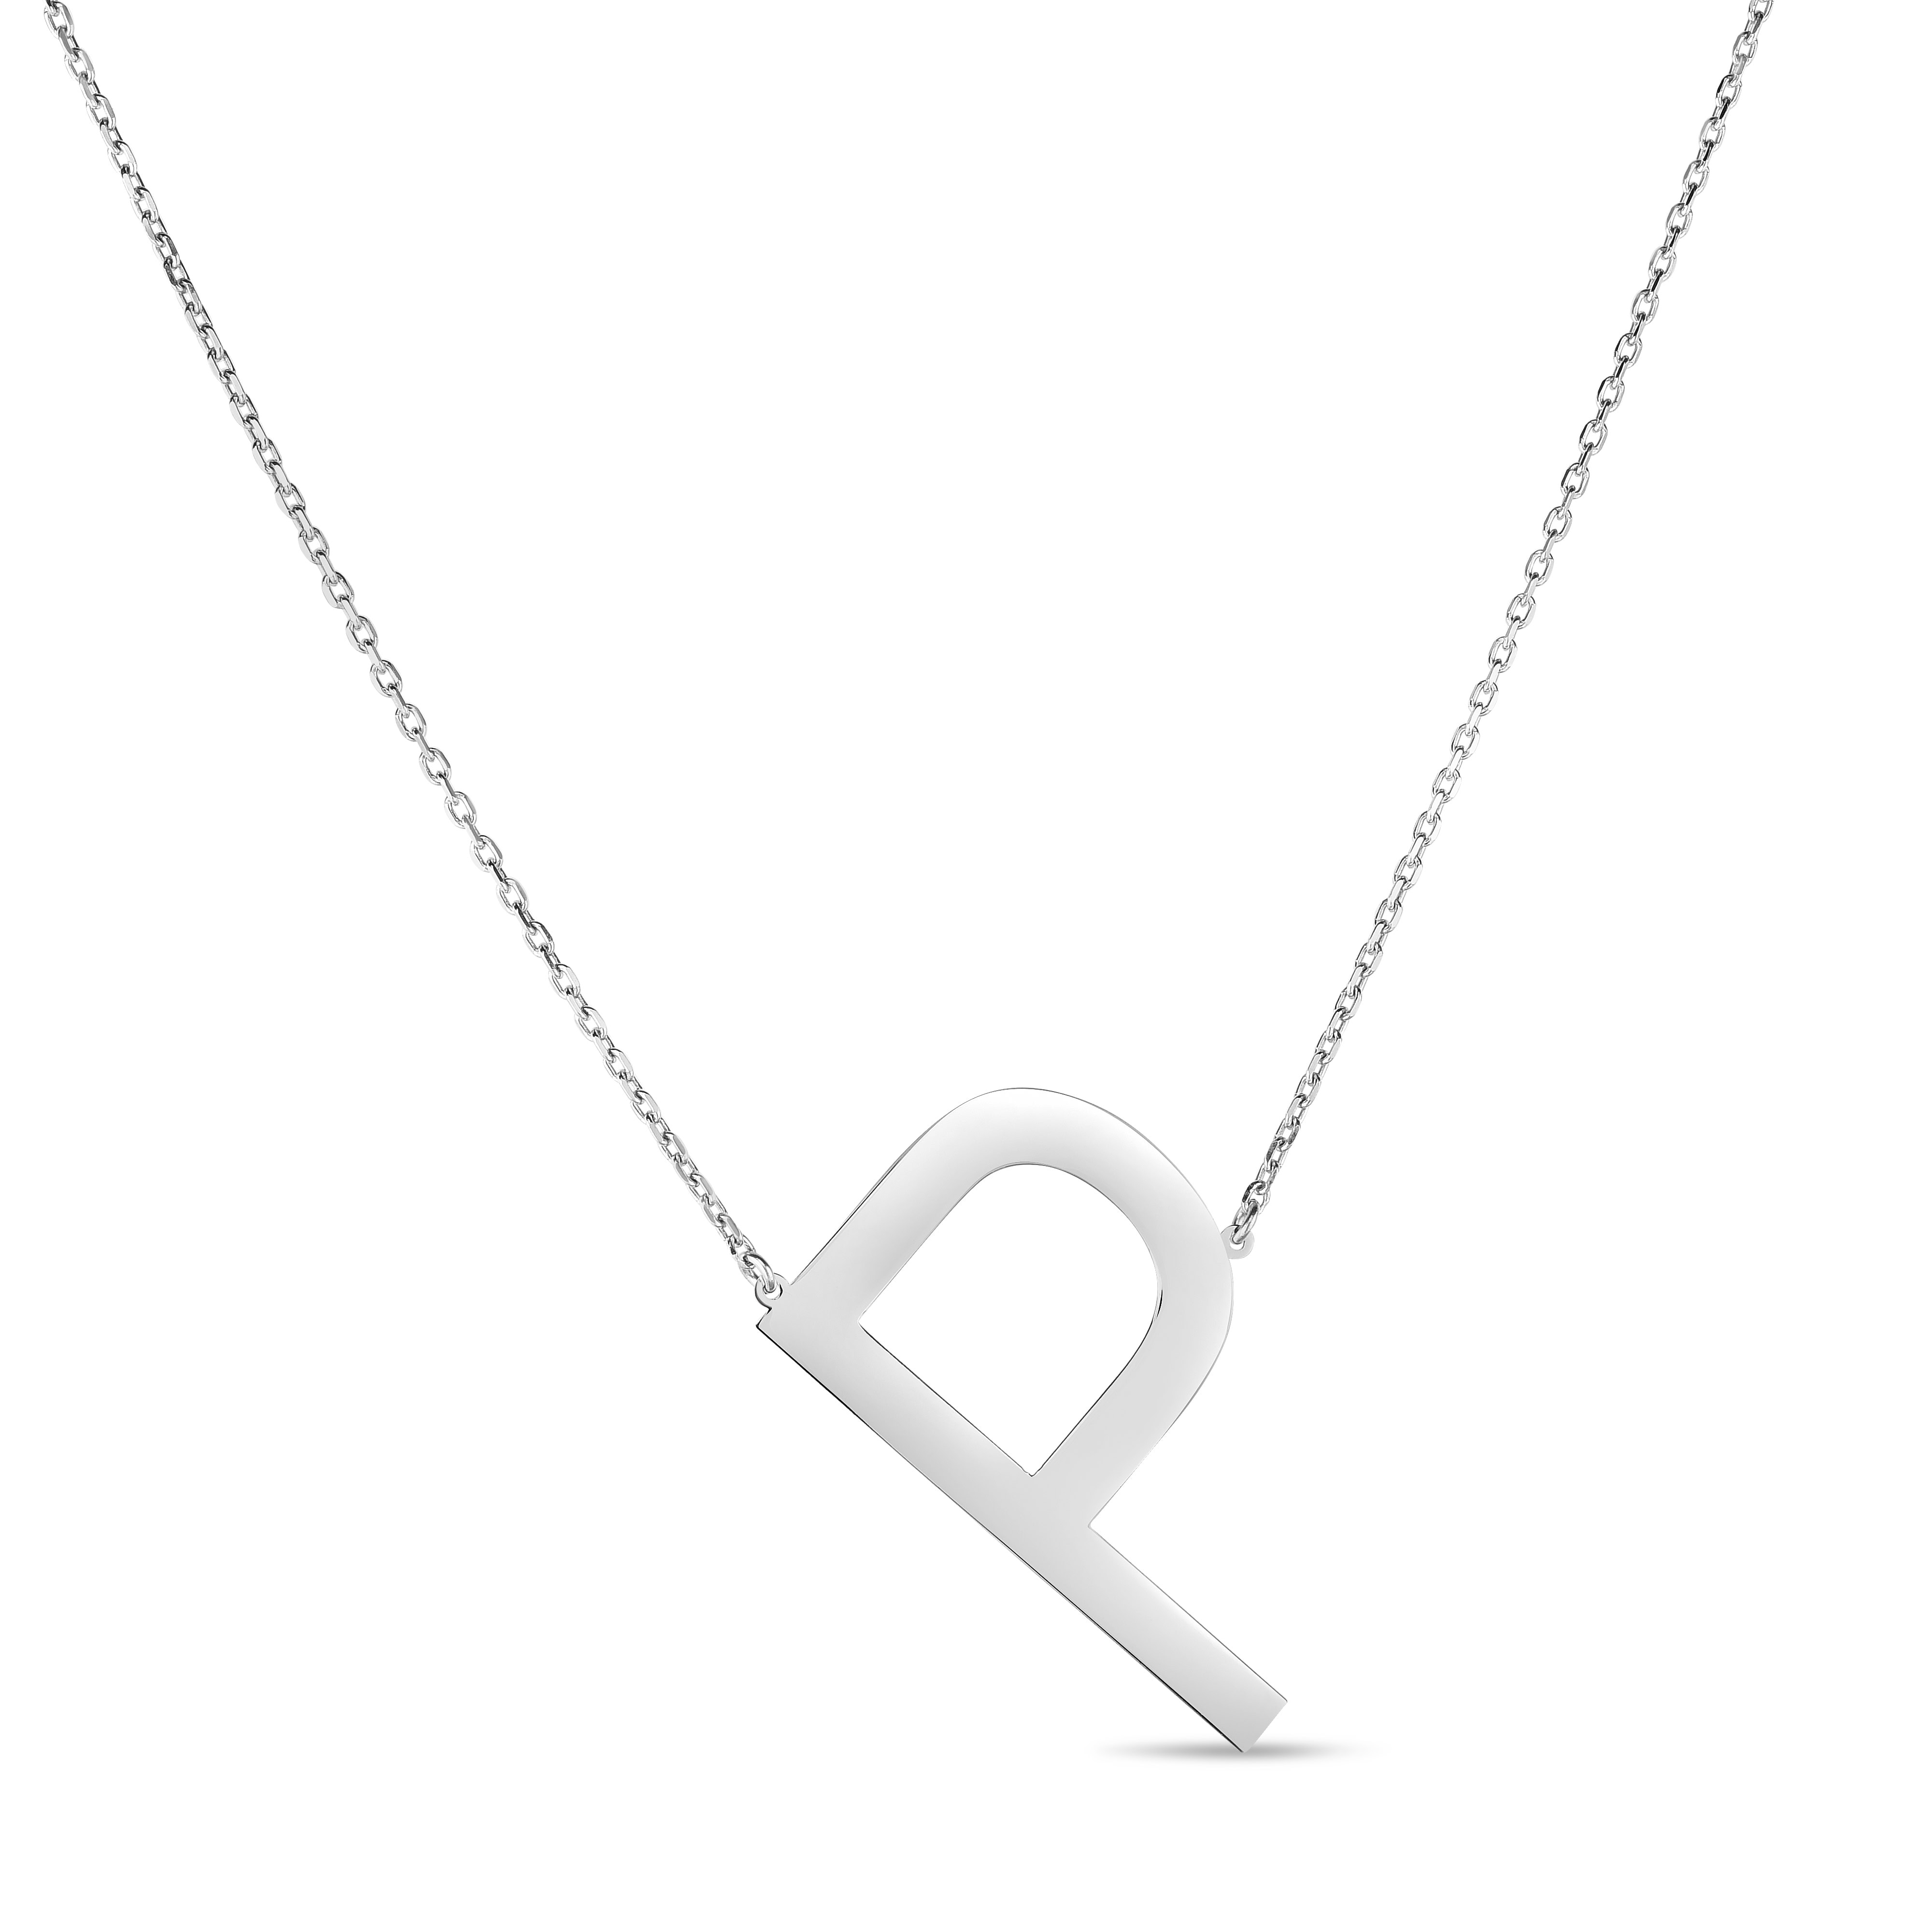 Silver P Letter Necklace